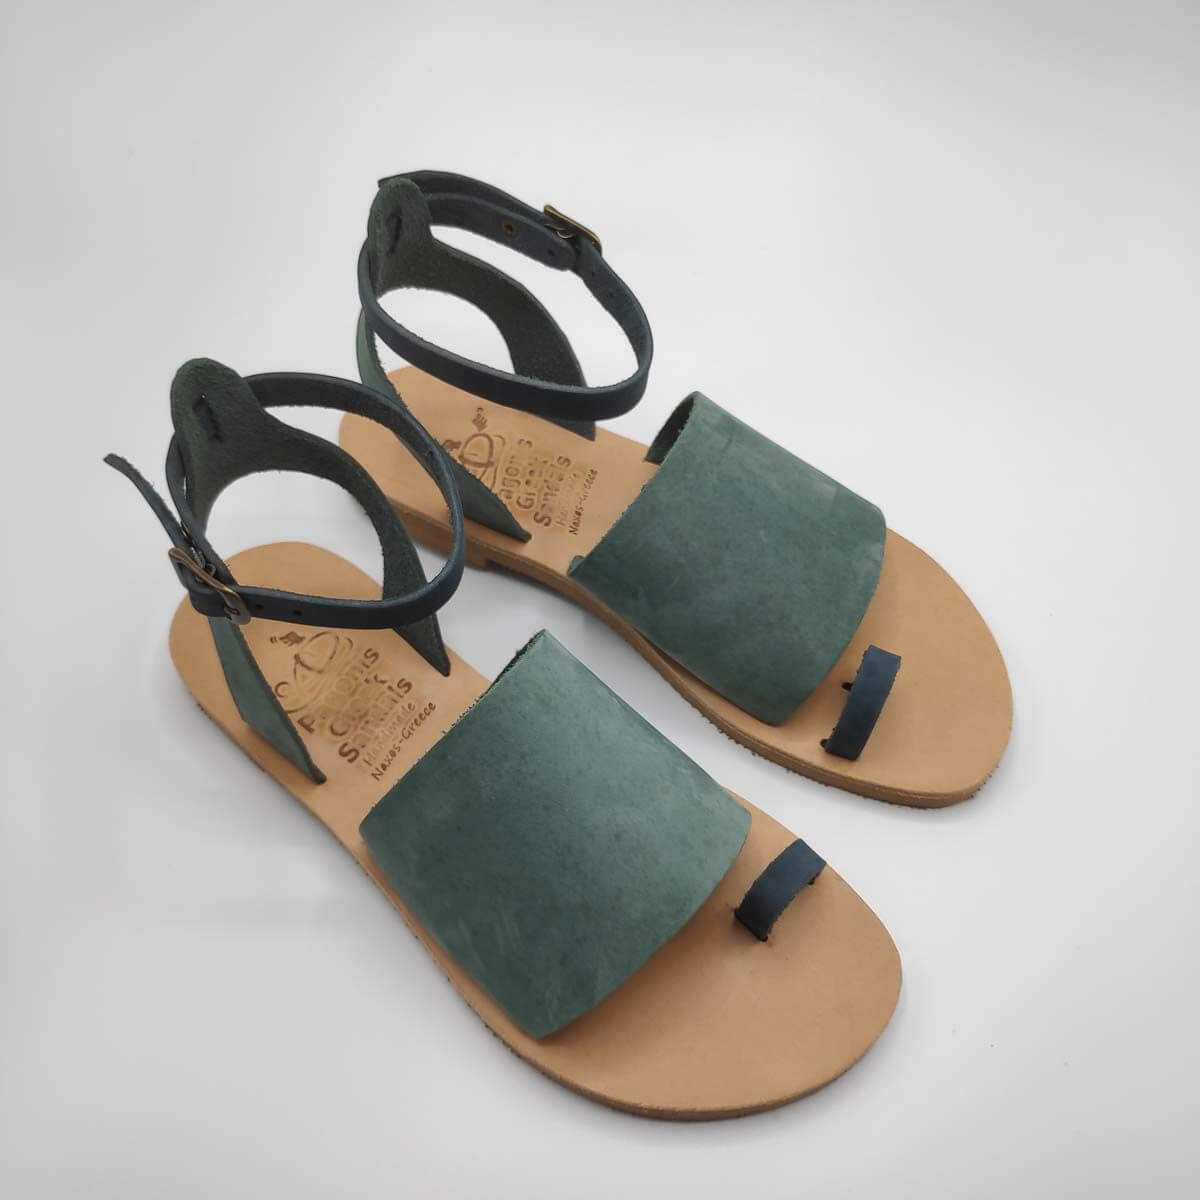 Green Leather Sandals with ankle strap